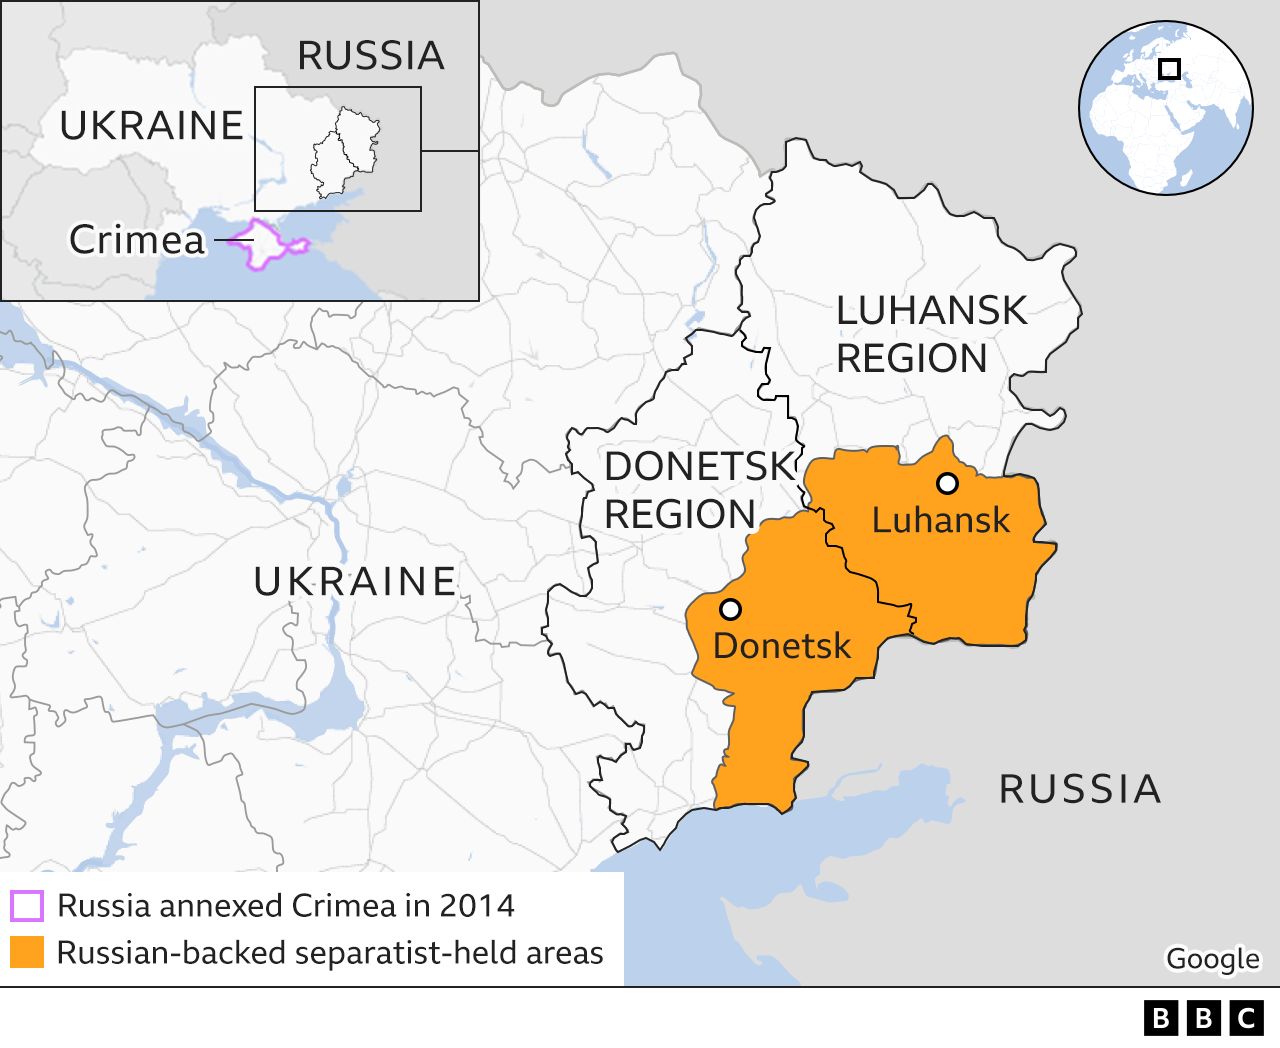 Map showing the regions of Donesk and Luhansk in eastern Ukraine and the Russian-backed separatist-held areas within those regions.